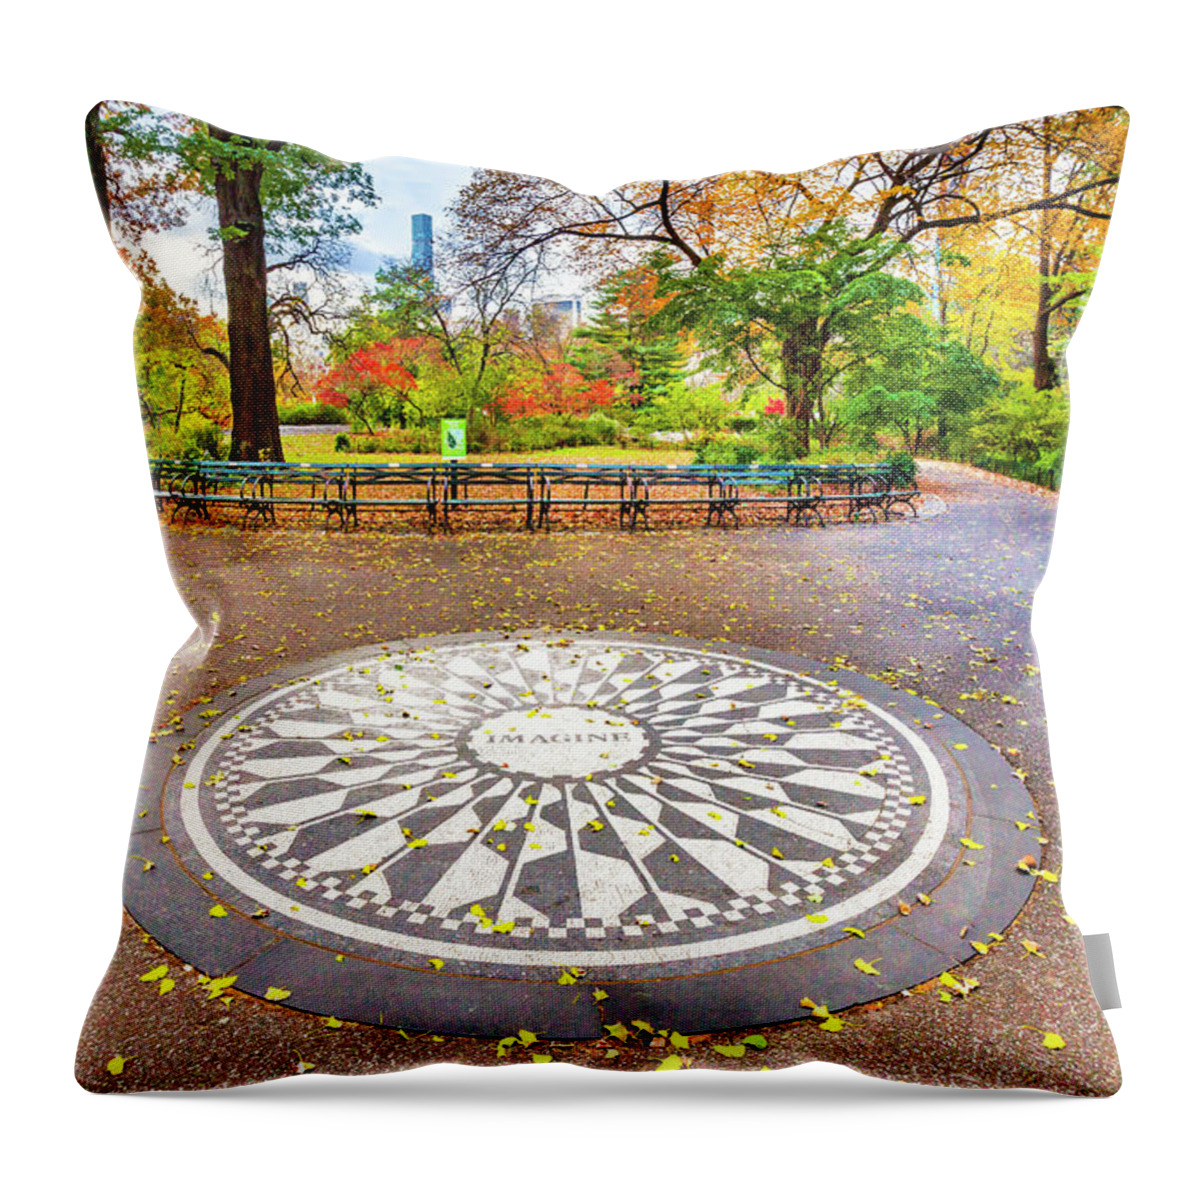 Estock Throw Pillow featuring the digital art Strawberry Fields In Central Park #1 by Claudia Uripos